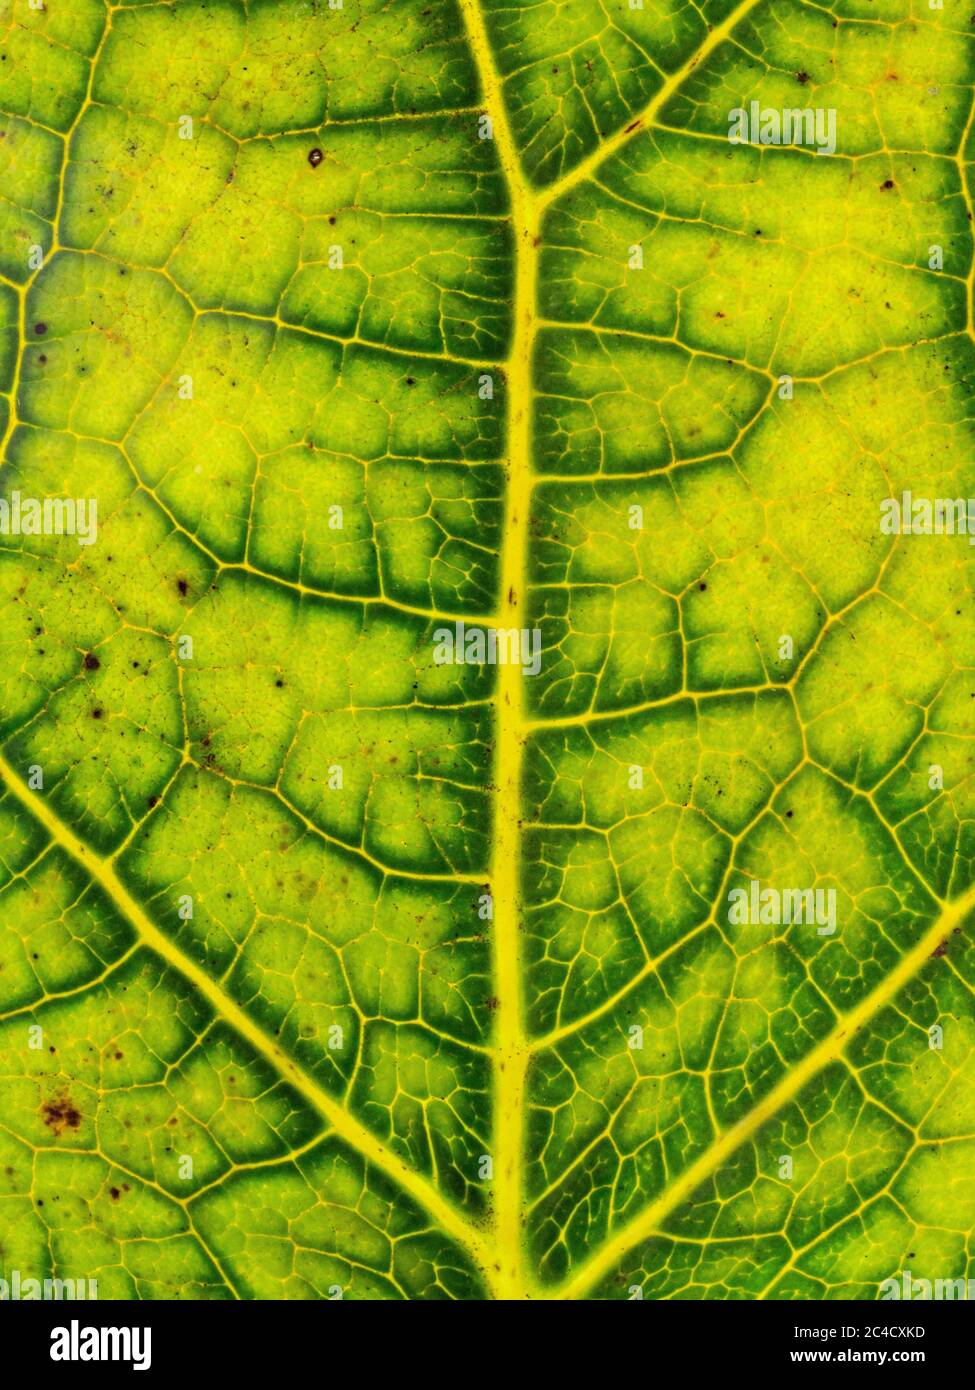 A close up of the details and patterns of the veins in a macleaya leaf Stock Photo